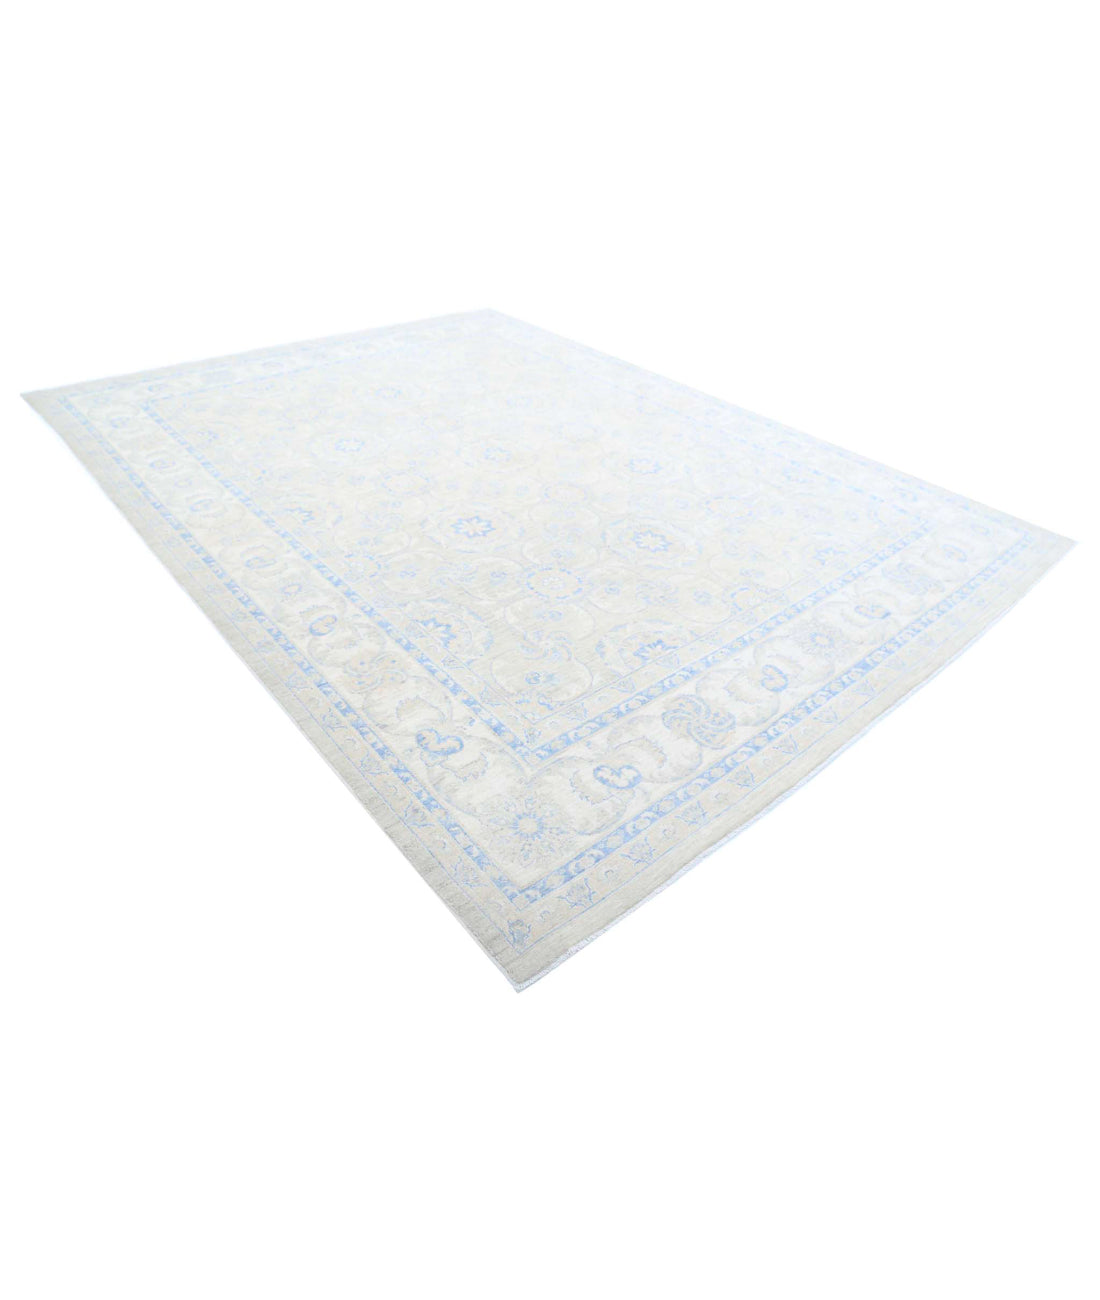 Serenity 9'0'' X 12'1'' Hand-Knotted Wool Rug 9'0'' x 12'1'' (270 X 363) / Ivory / Ivory